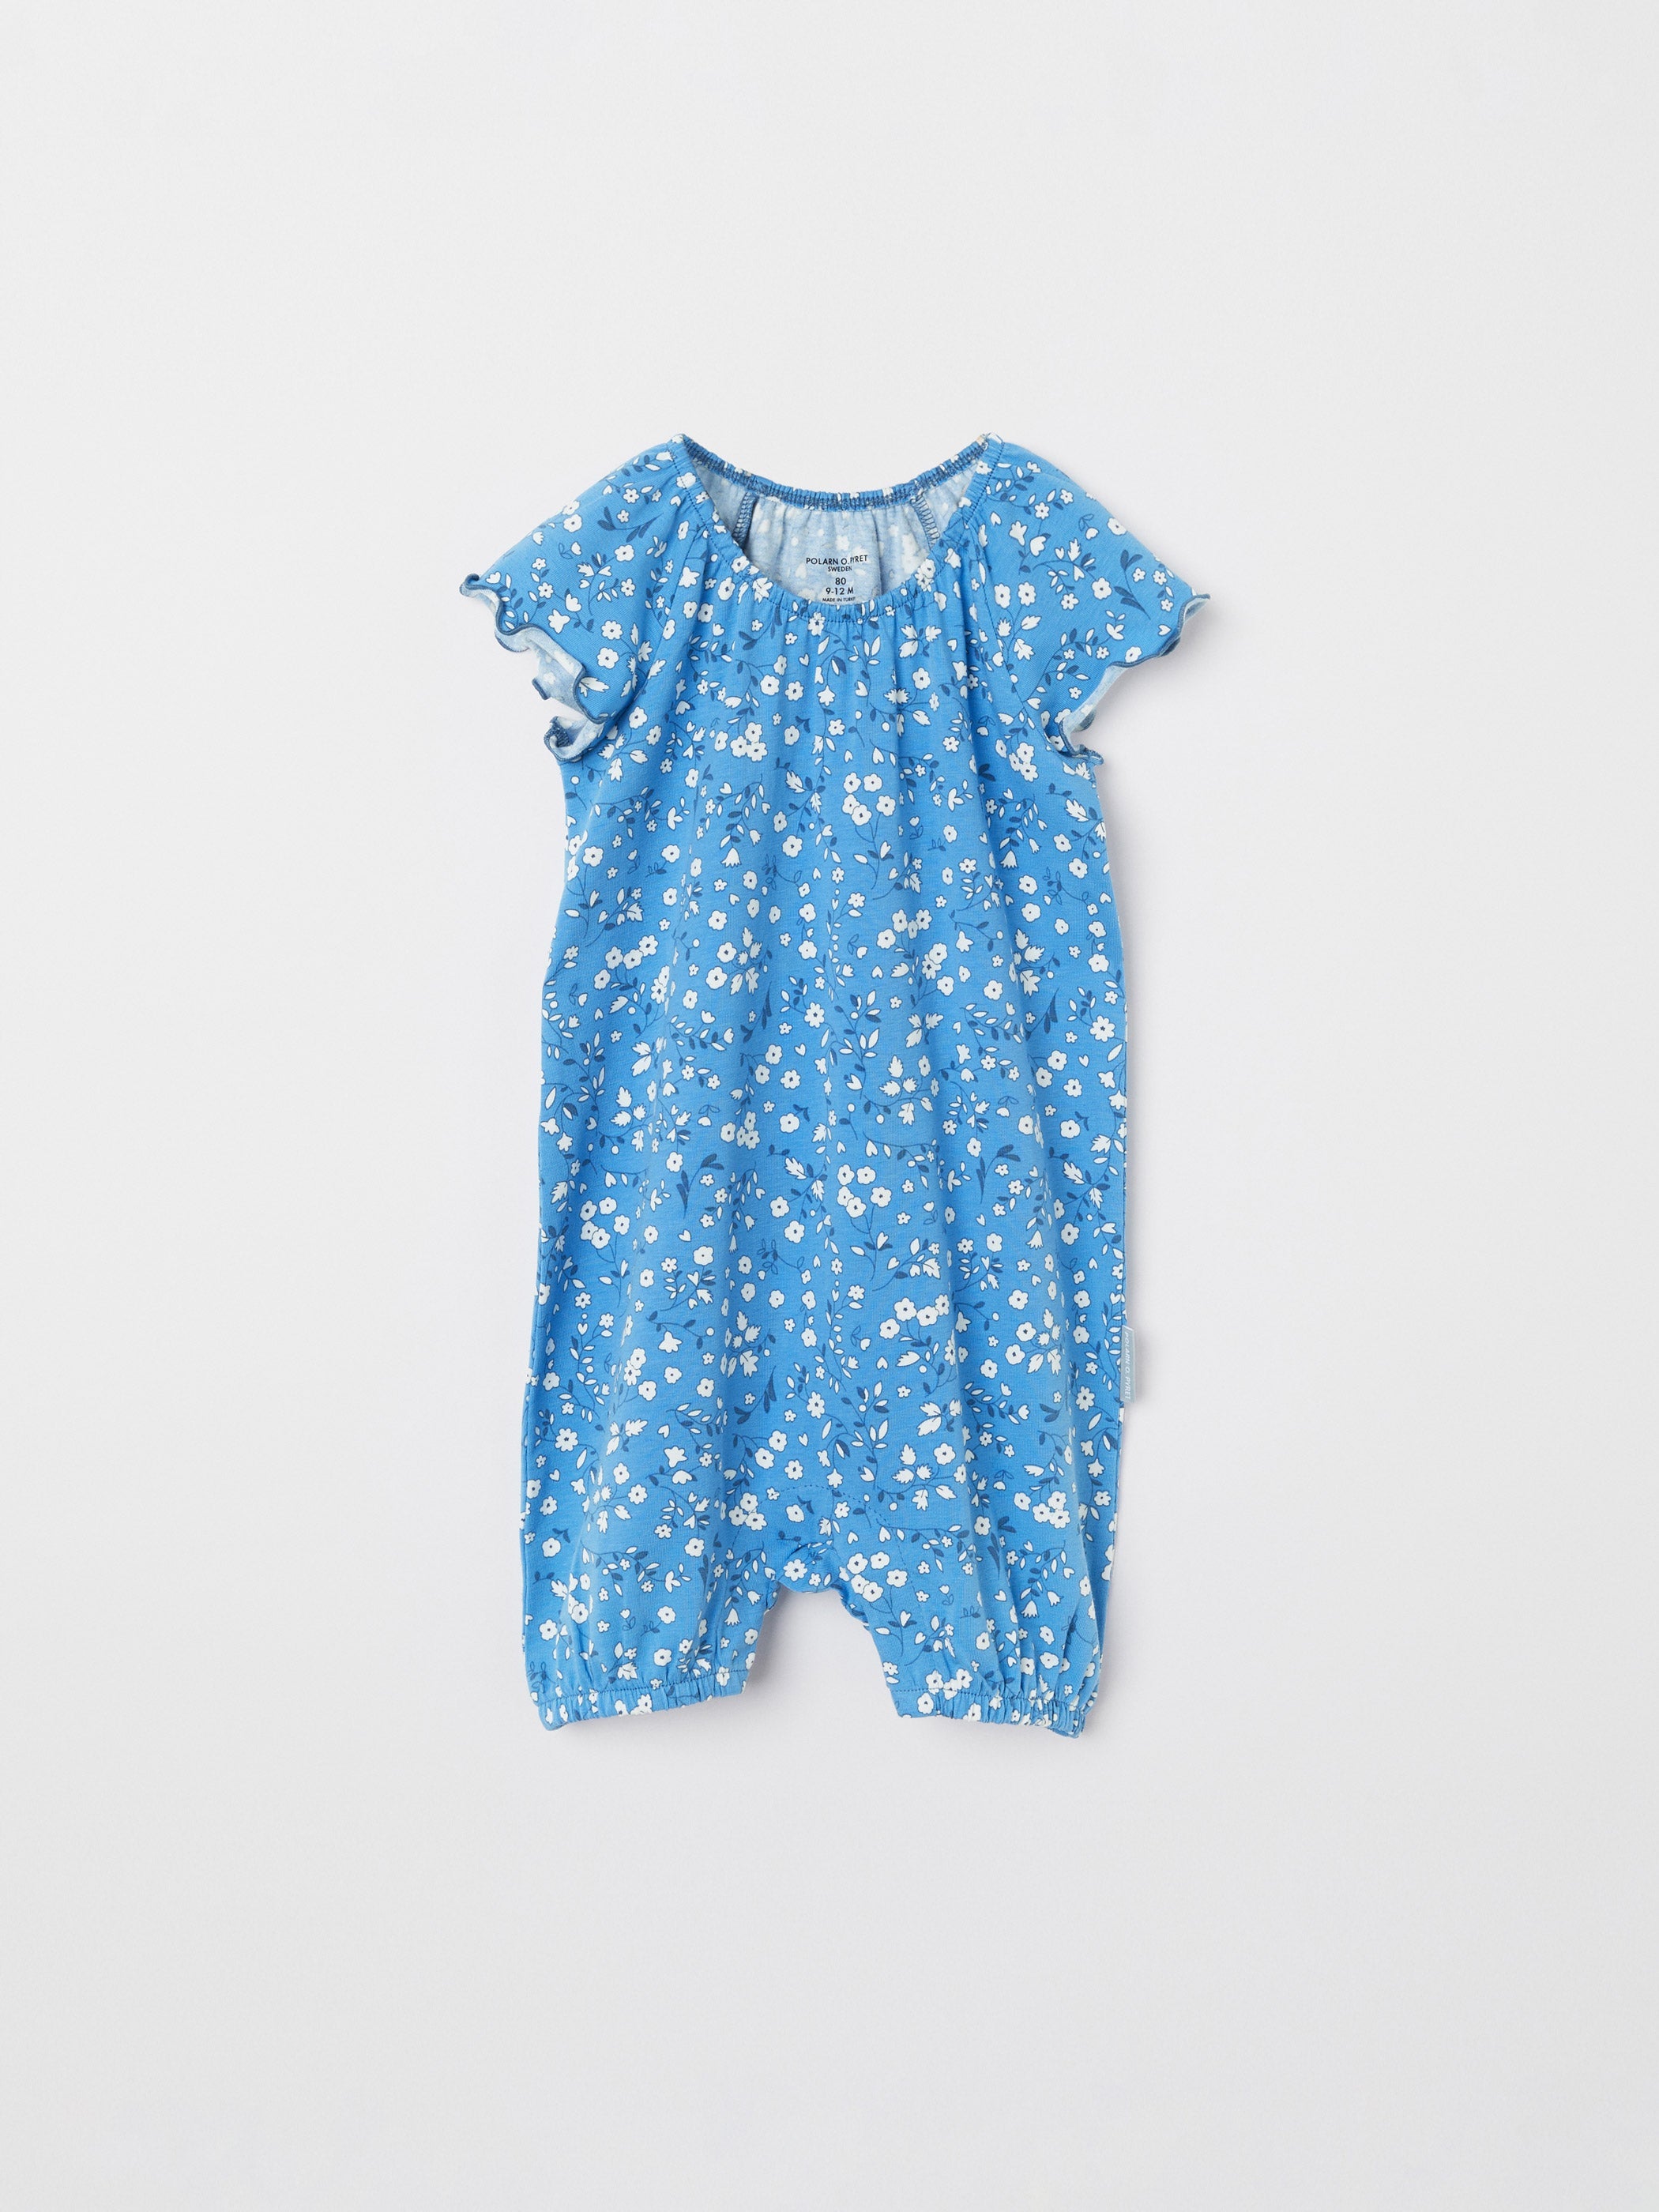 Ditsy Floral Baby Romper